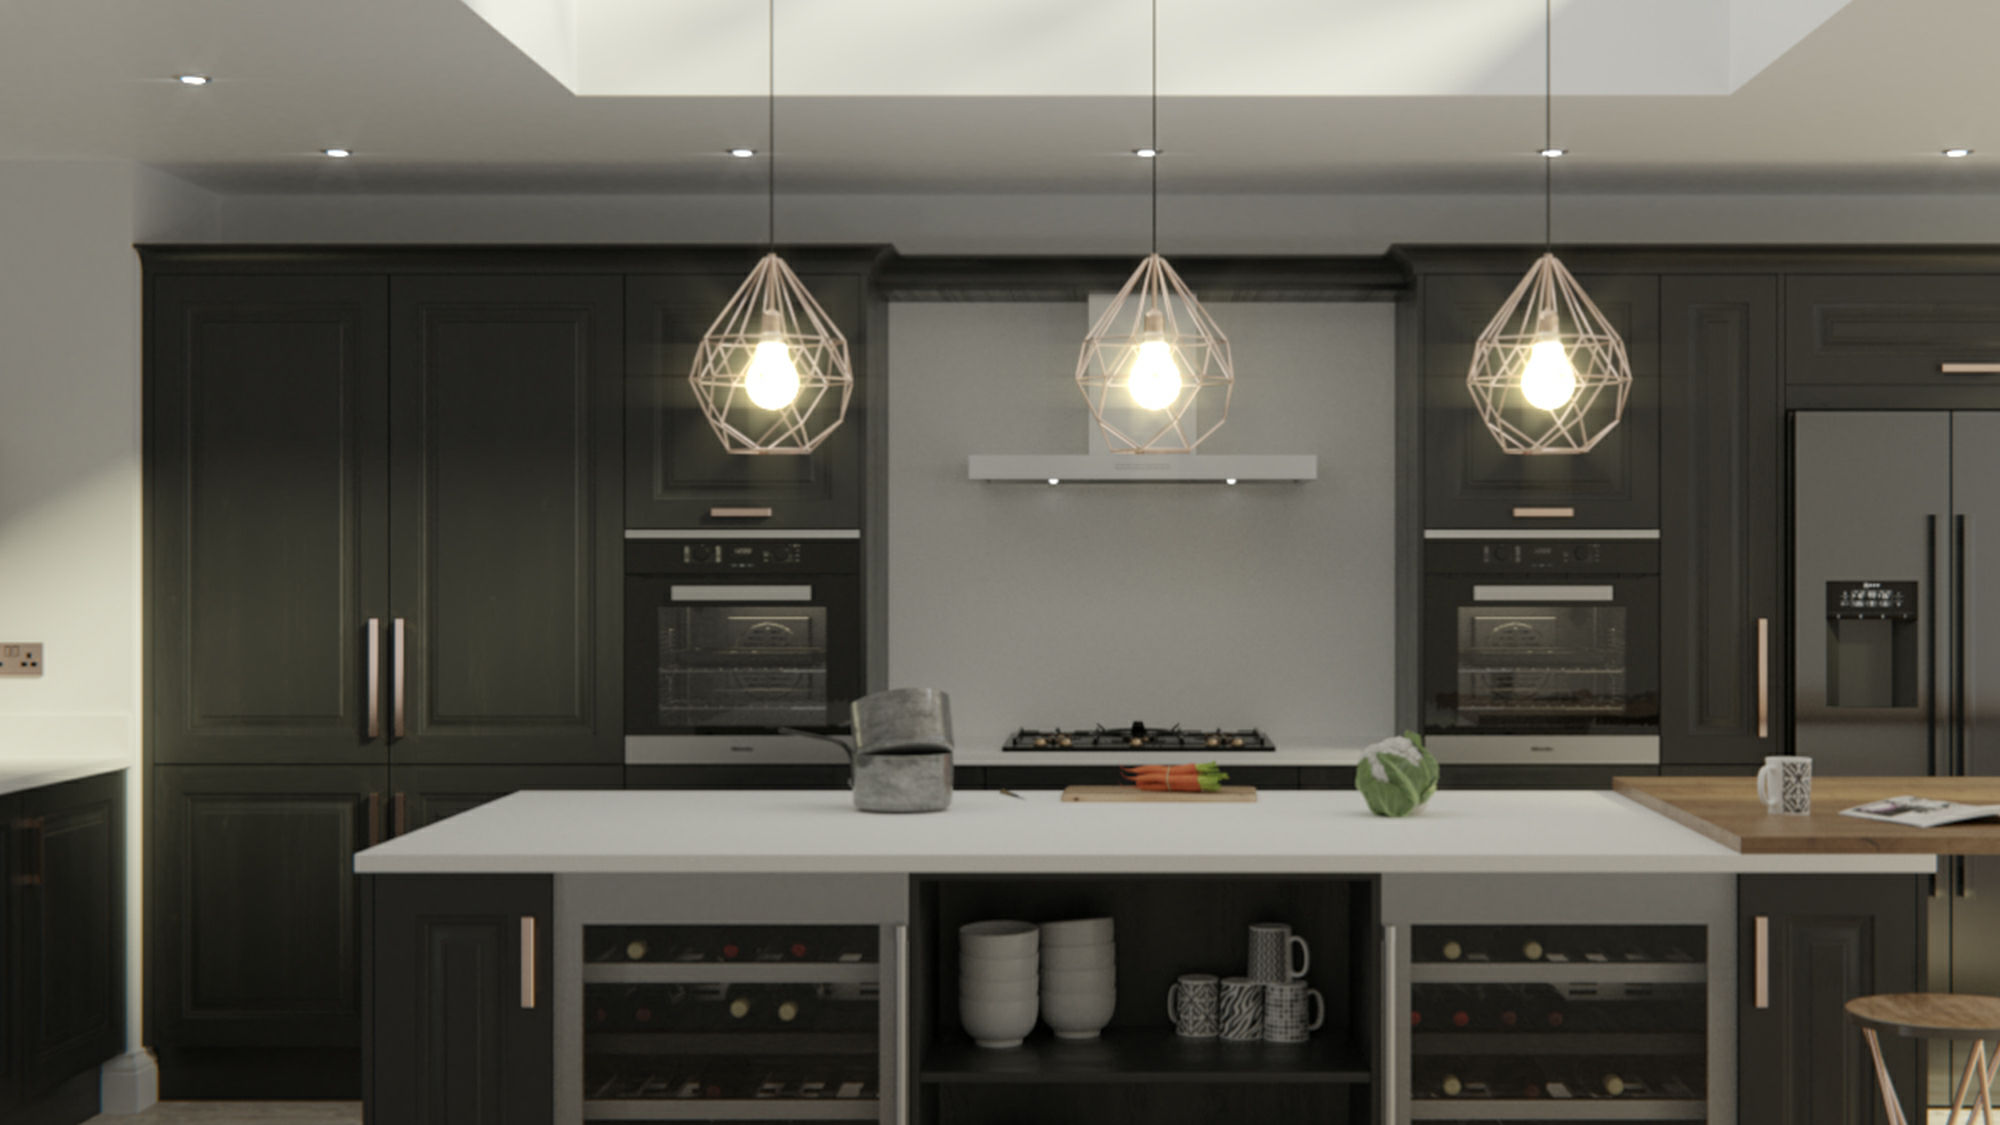 Jefferson solid wood graphite kitchens combining robust design with the sophistication of graphite grey